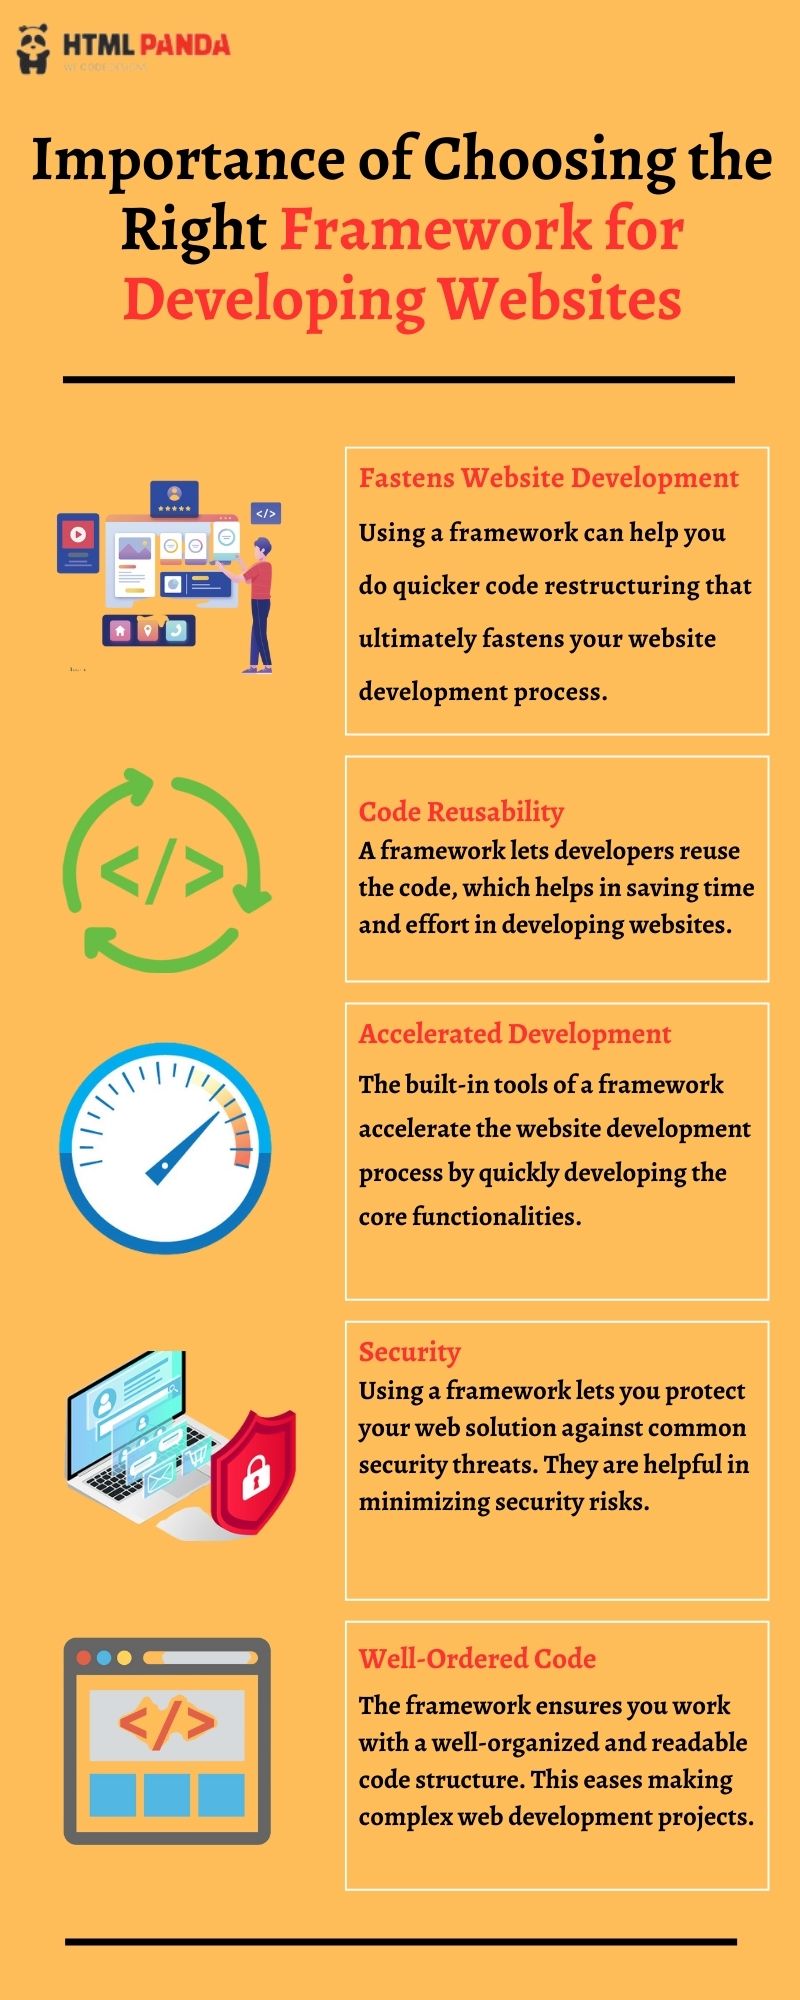 Importance_of_Choosing_the_Right_Framework_for_Developing_Websites